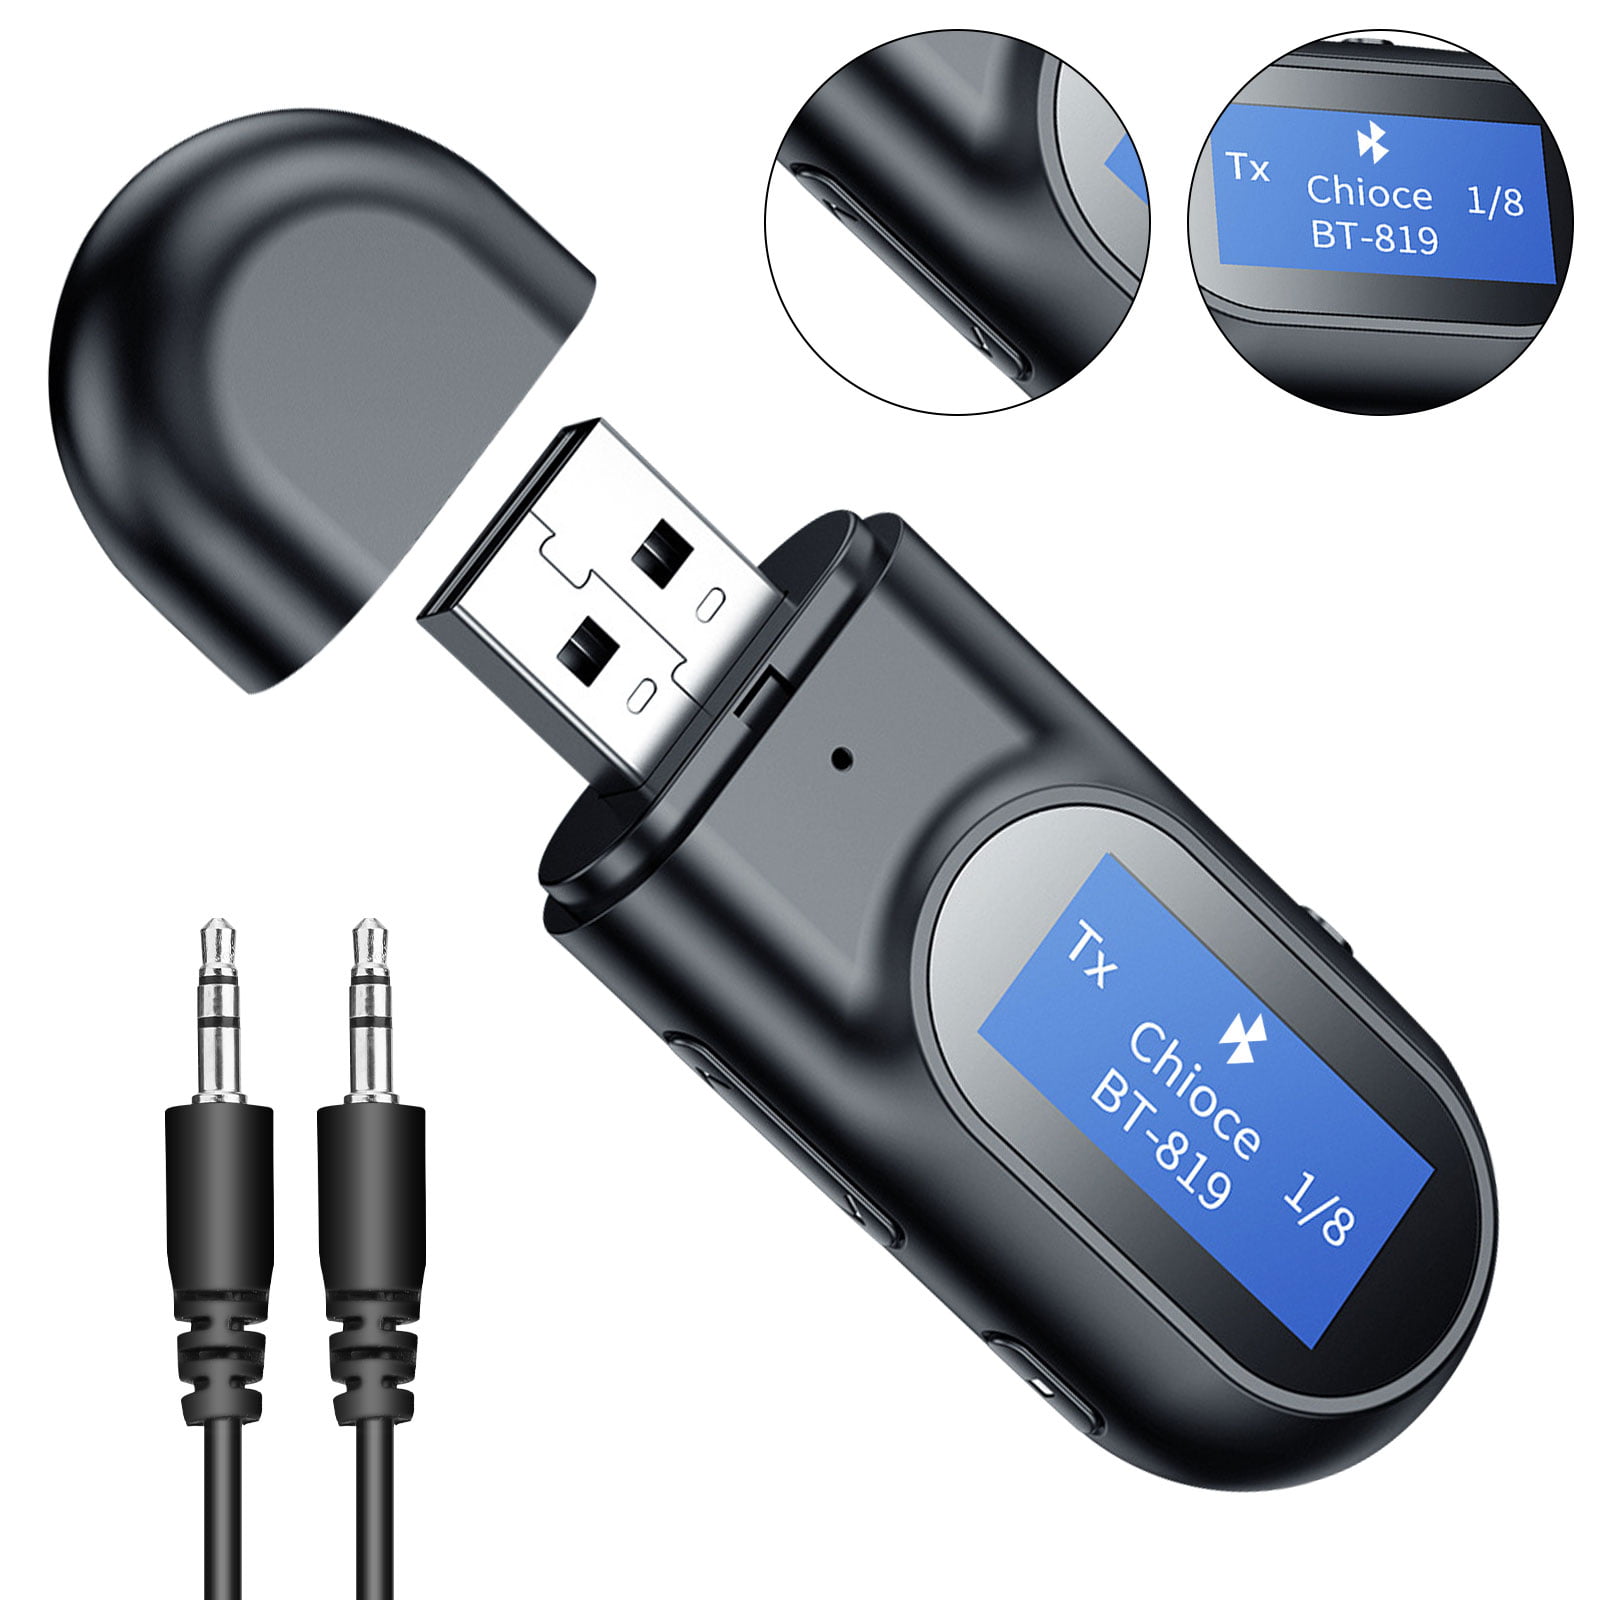 Player Bluetooth 5.0 Adapter Digital Devices USB Receiver Music Audio Receiver ~ 